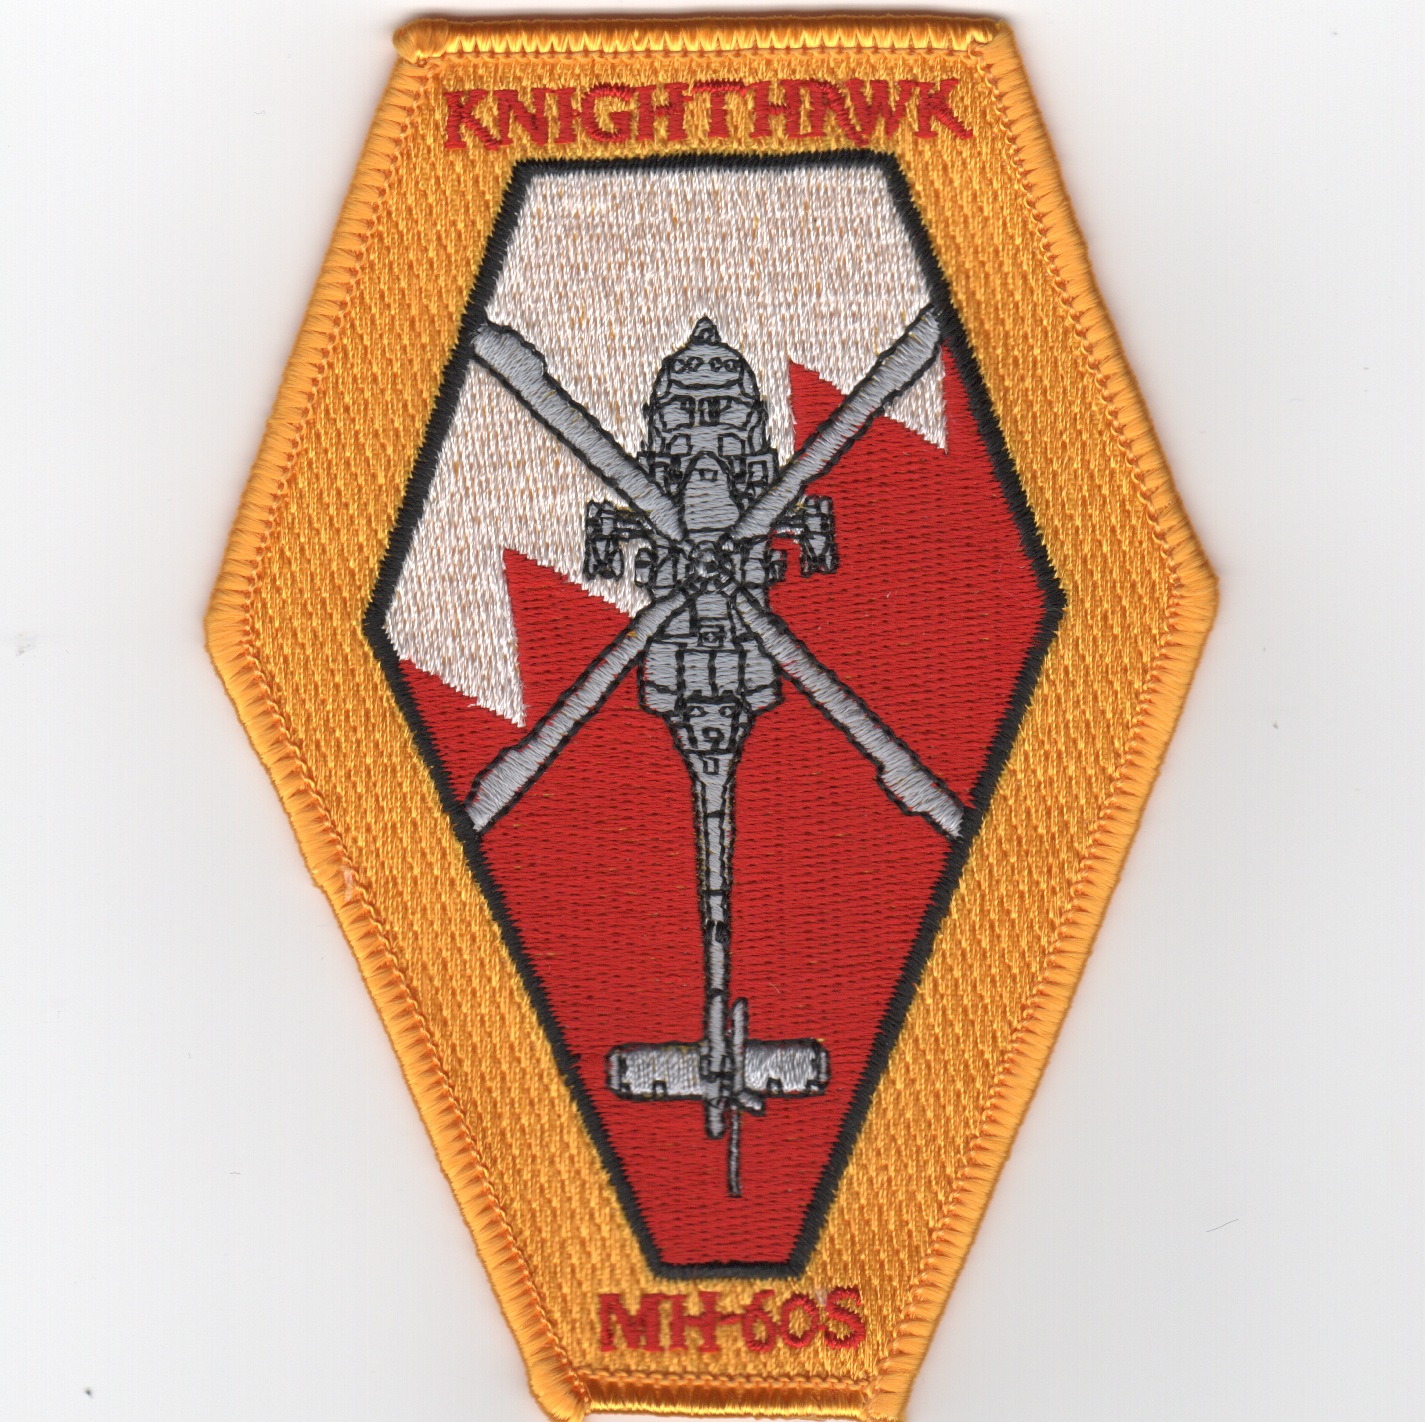 MH-60S 'Knighthawks' Coffin Patch